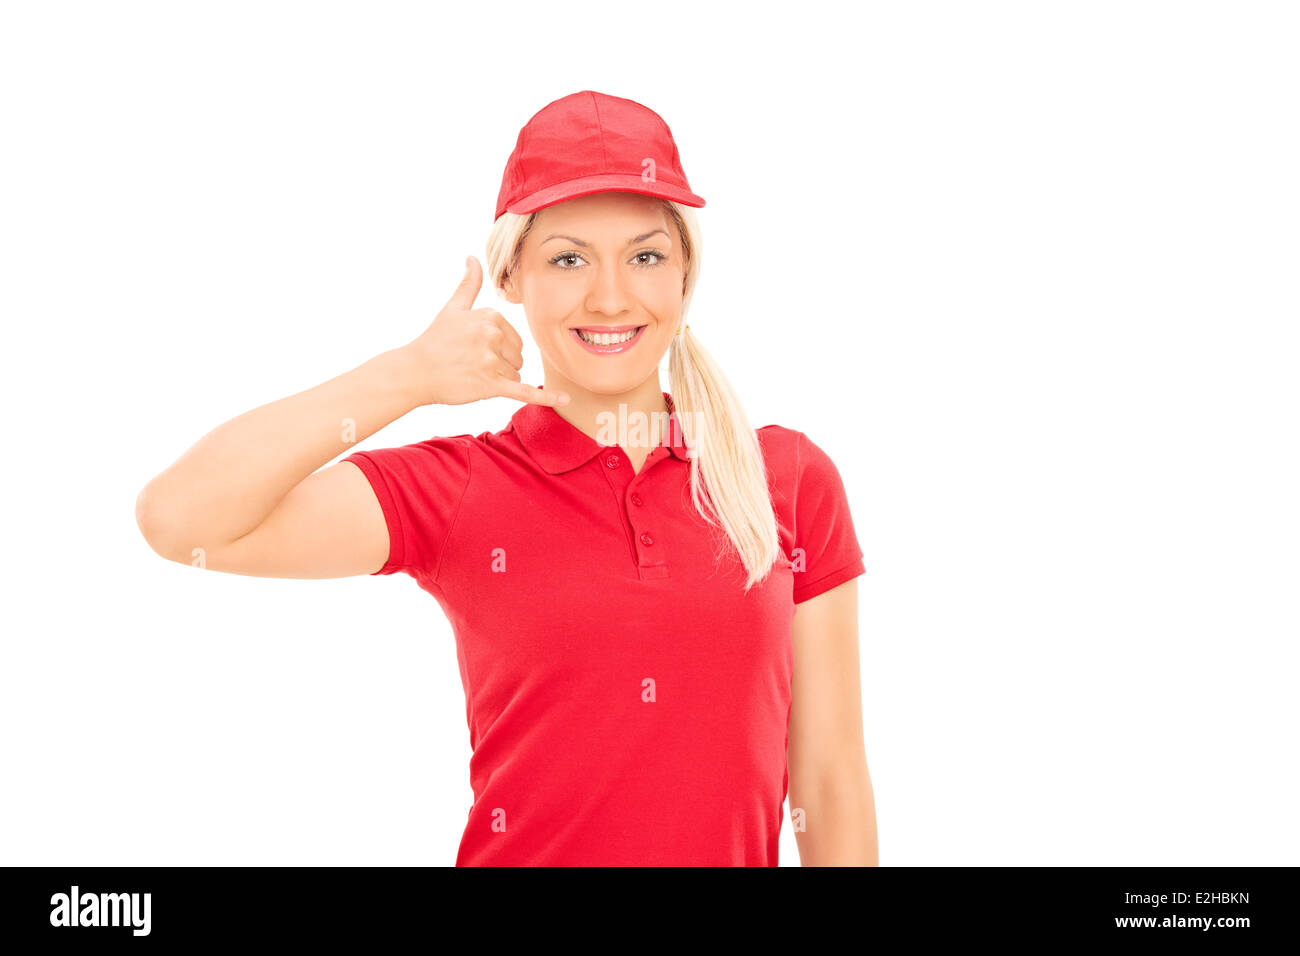 Delivery girl making call sign with her hand Stock Photo